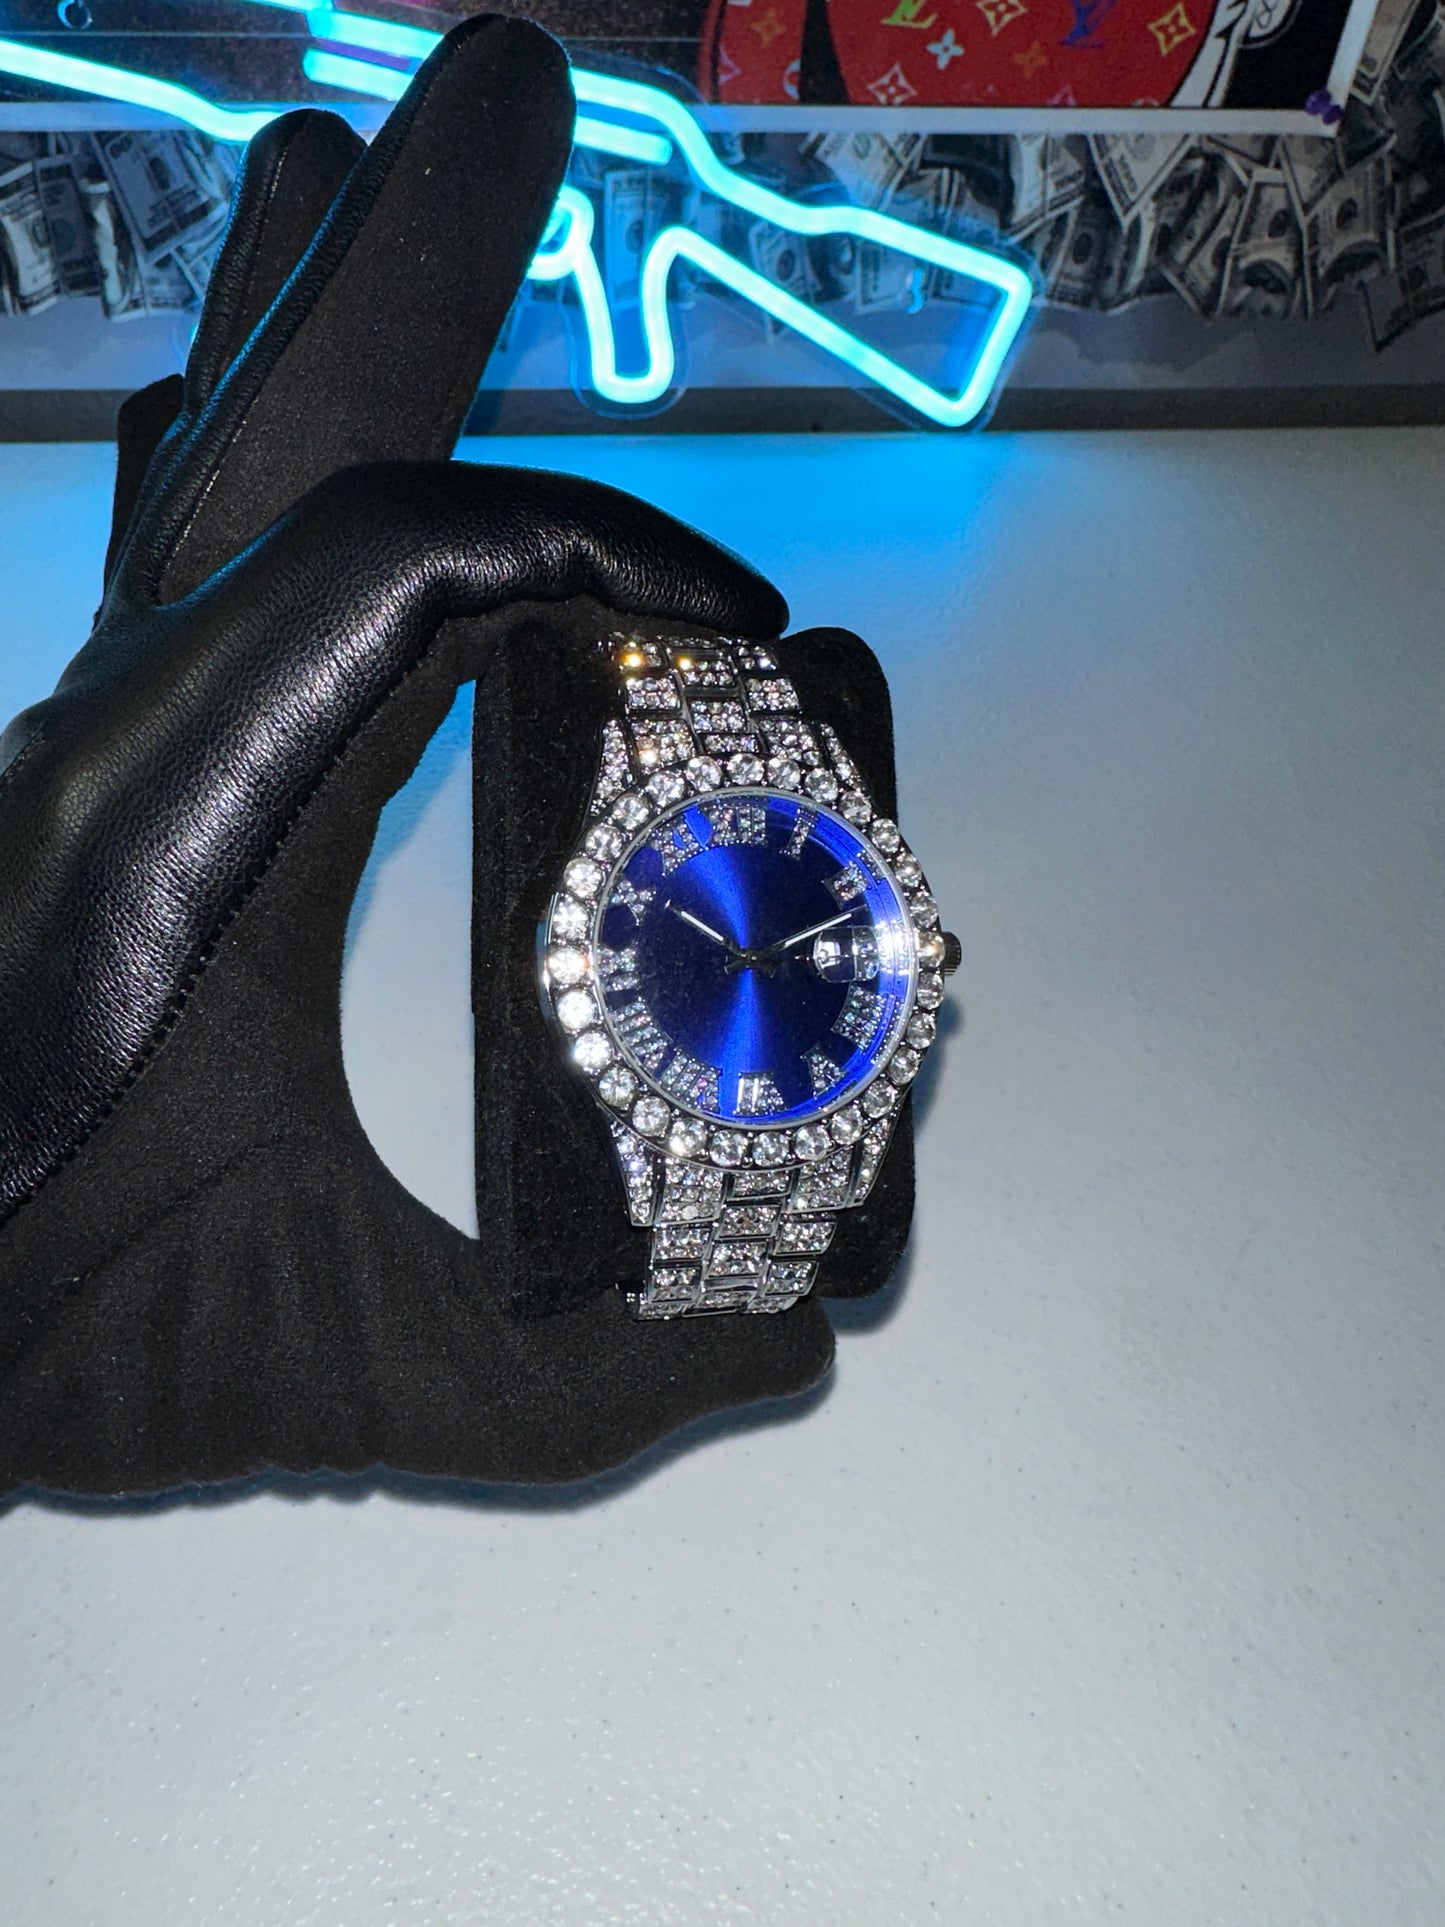 Icy watches